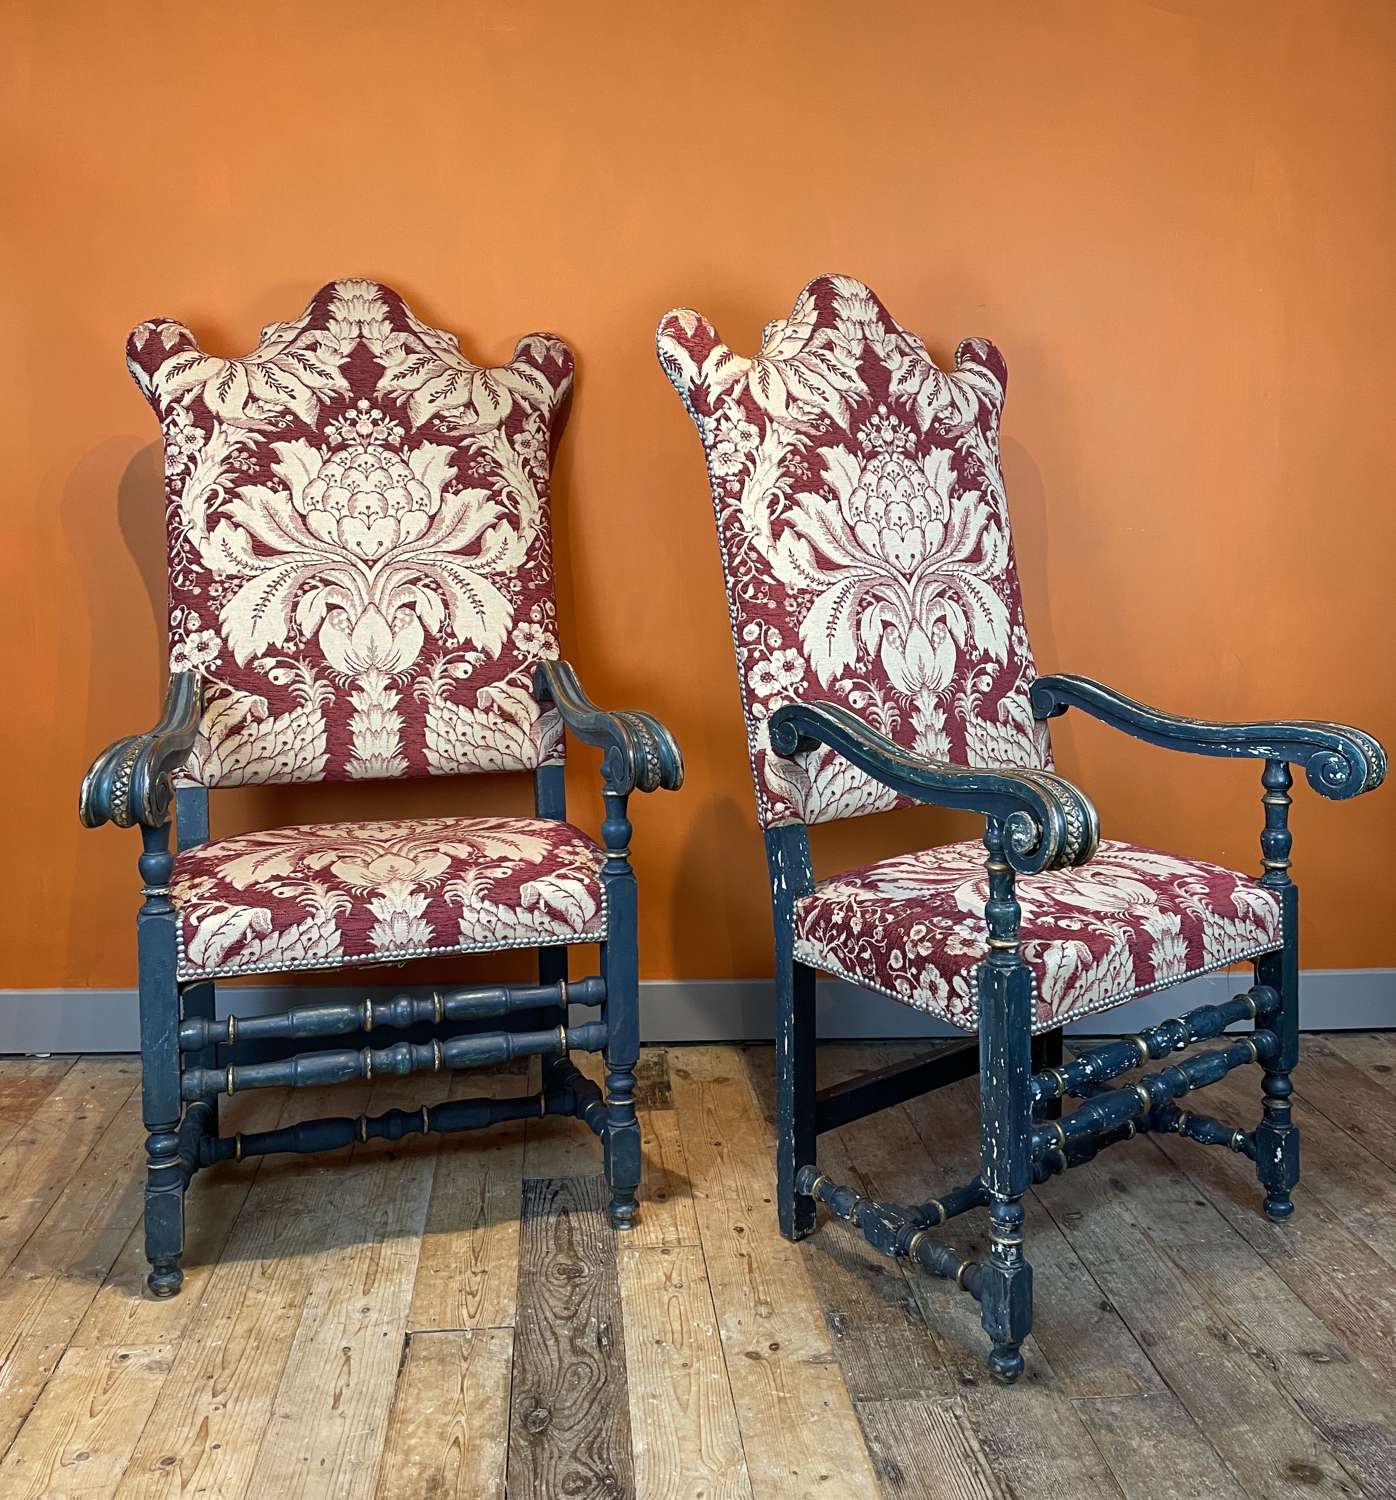 Large Pair of 19th Century Continental Armchairs in 17th Century Style